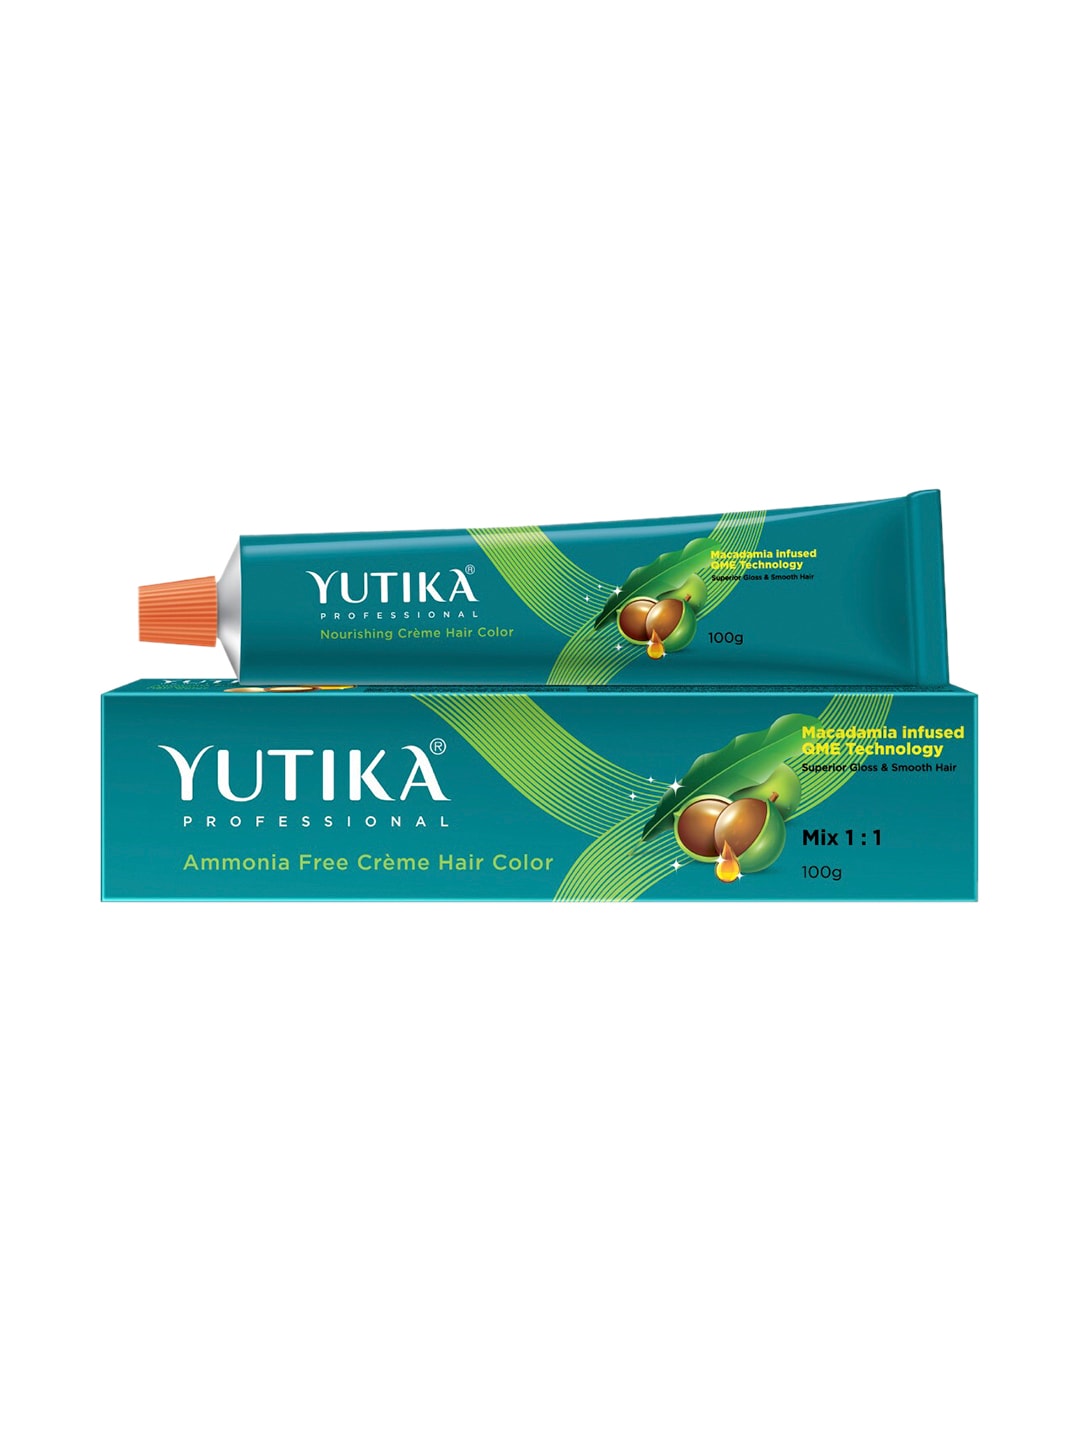 YUTIKA Golden Brown 4.3 Professional Creme Hair Color 100gm Price in India